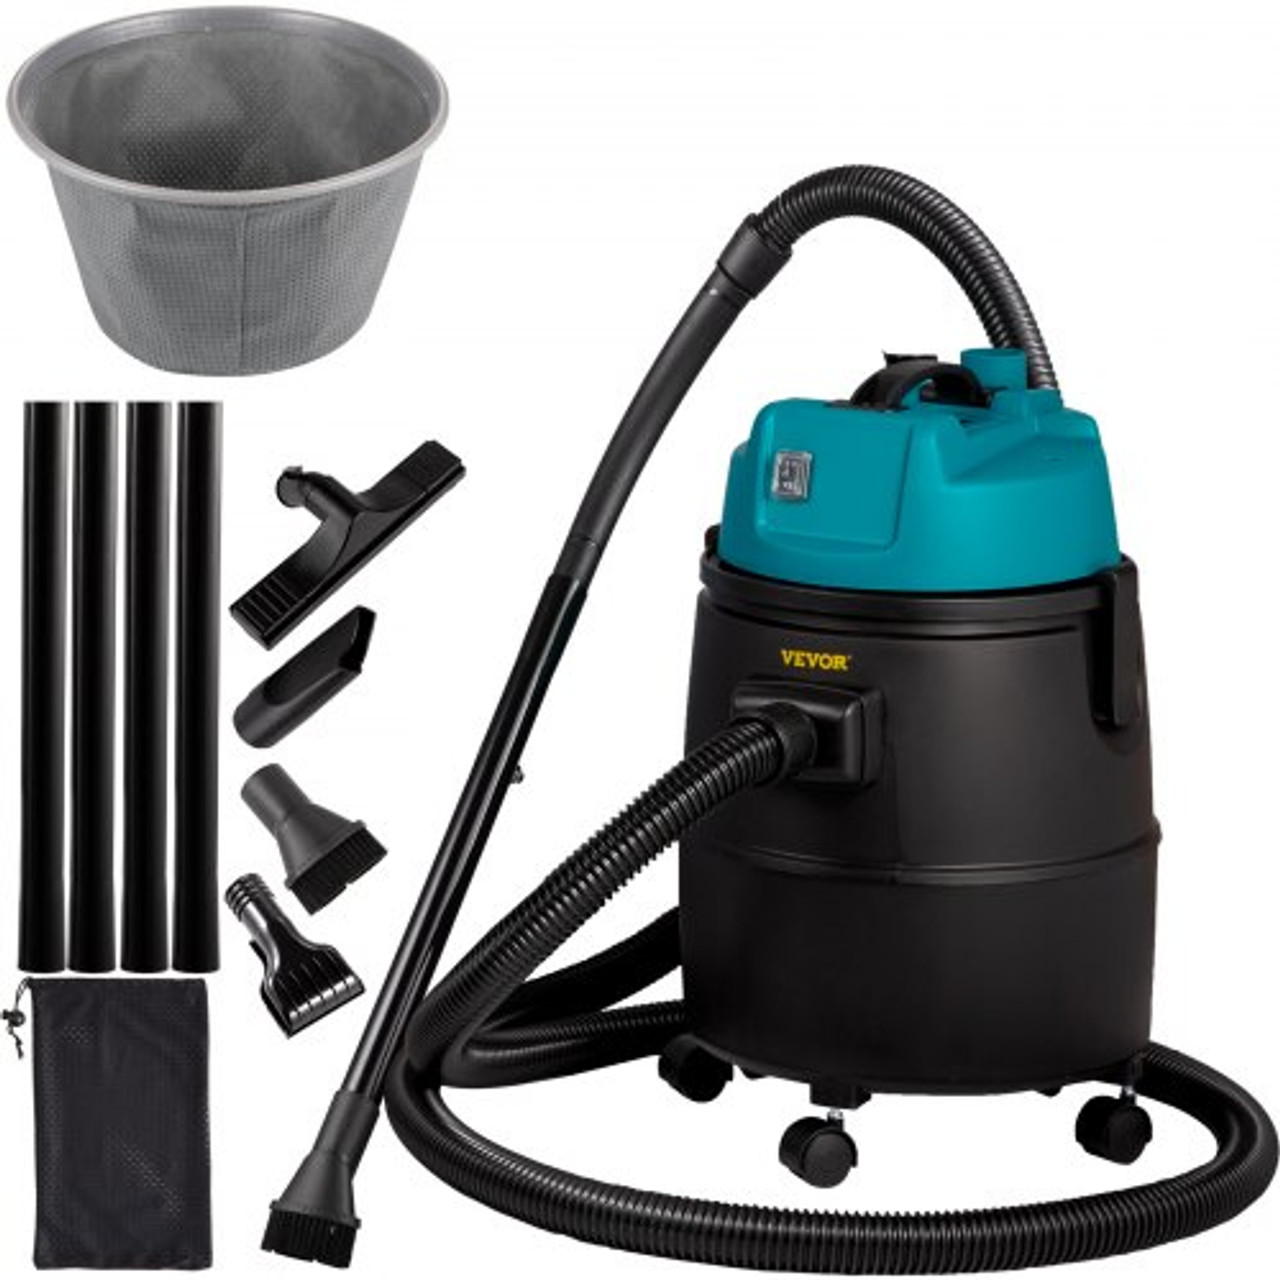 Pond Vacuum Cleaner, 1400W Motor in Single Chamber Suction System, 120V Motor w/15 ft Electric Wire, 4 Brush Heads, 4 Extended Tubes, 1 Filter Bag for Multi-use Cleaning Above Ground